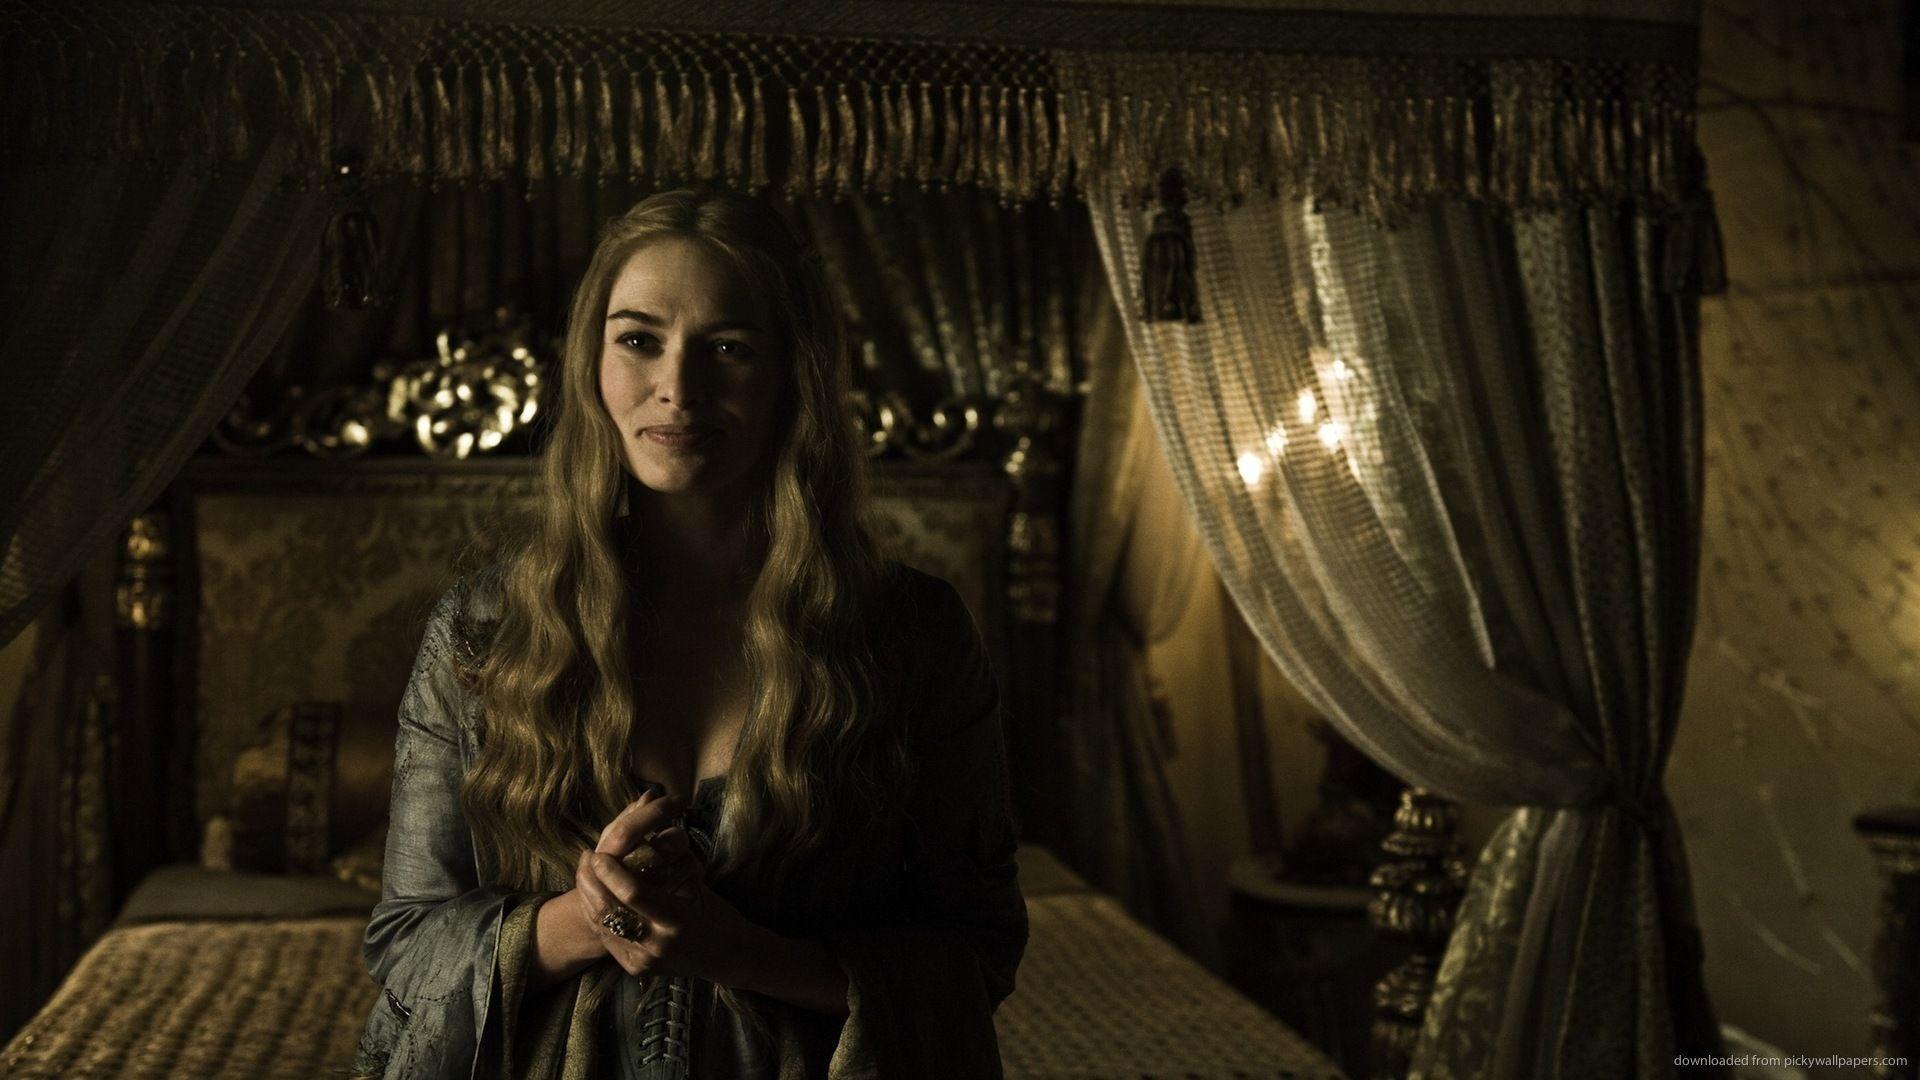 Download 1920x1080 Cersei Lannister Near The Bed Wallpaper